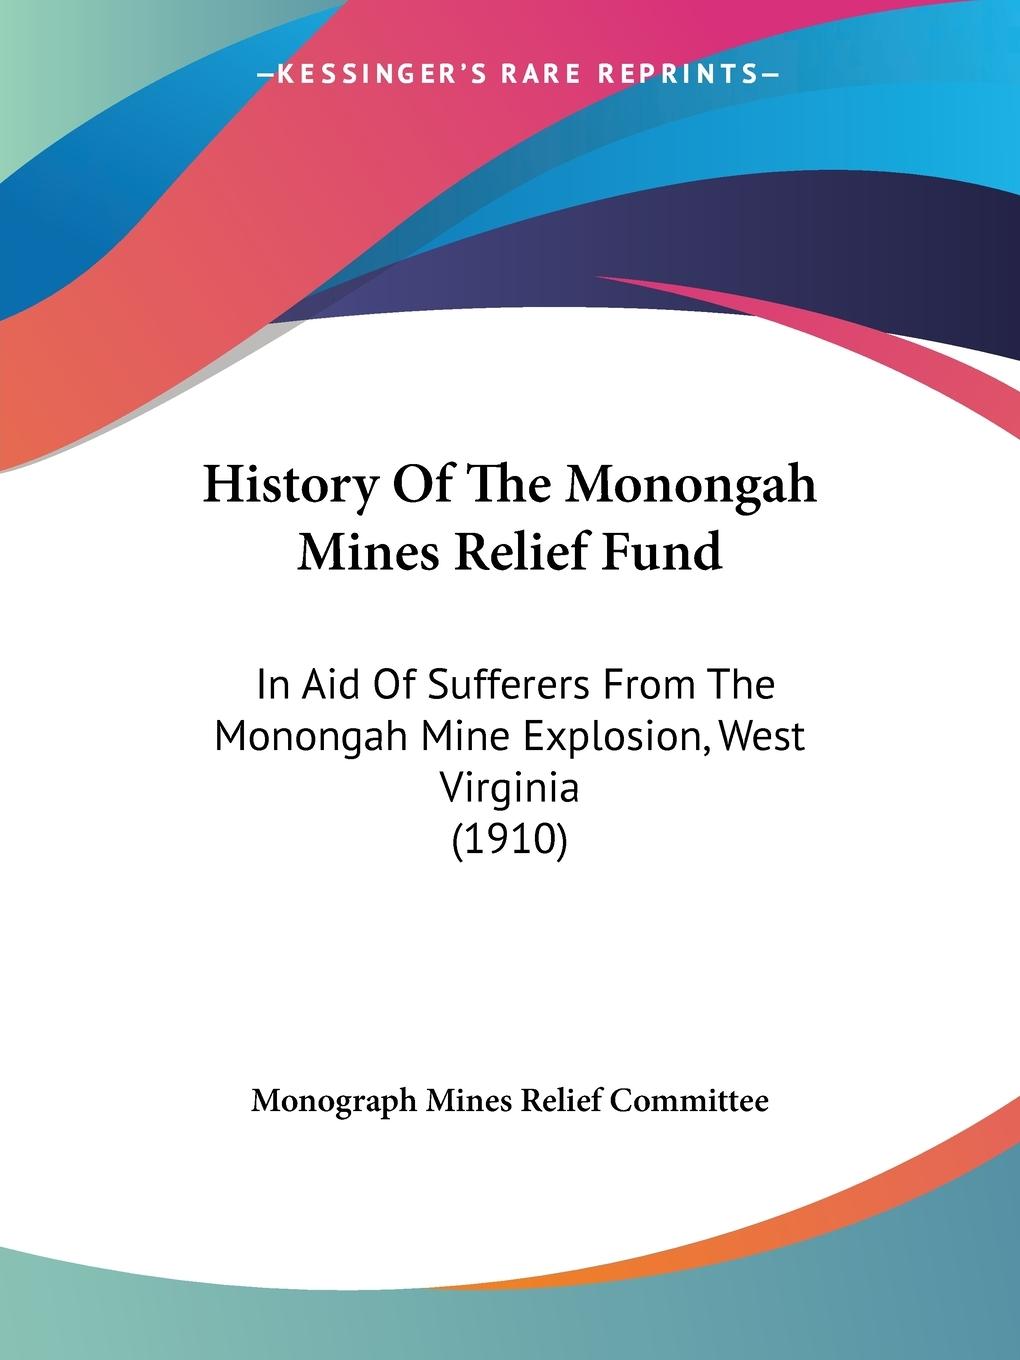 History Of The Monongah Mines Relief Fund - Monograph Mines Relief Committee